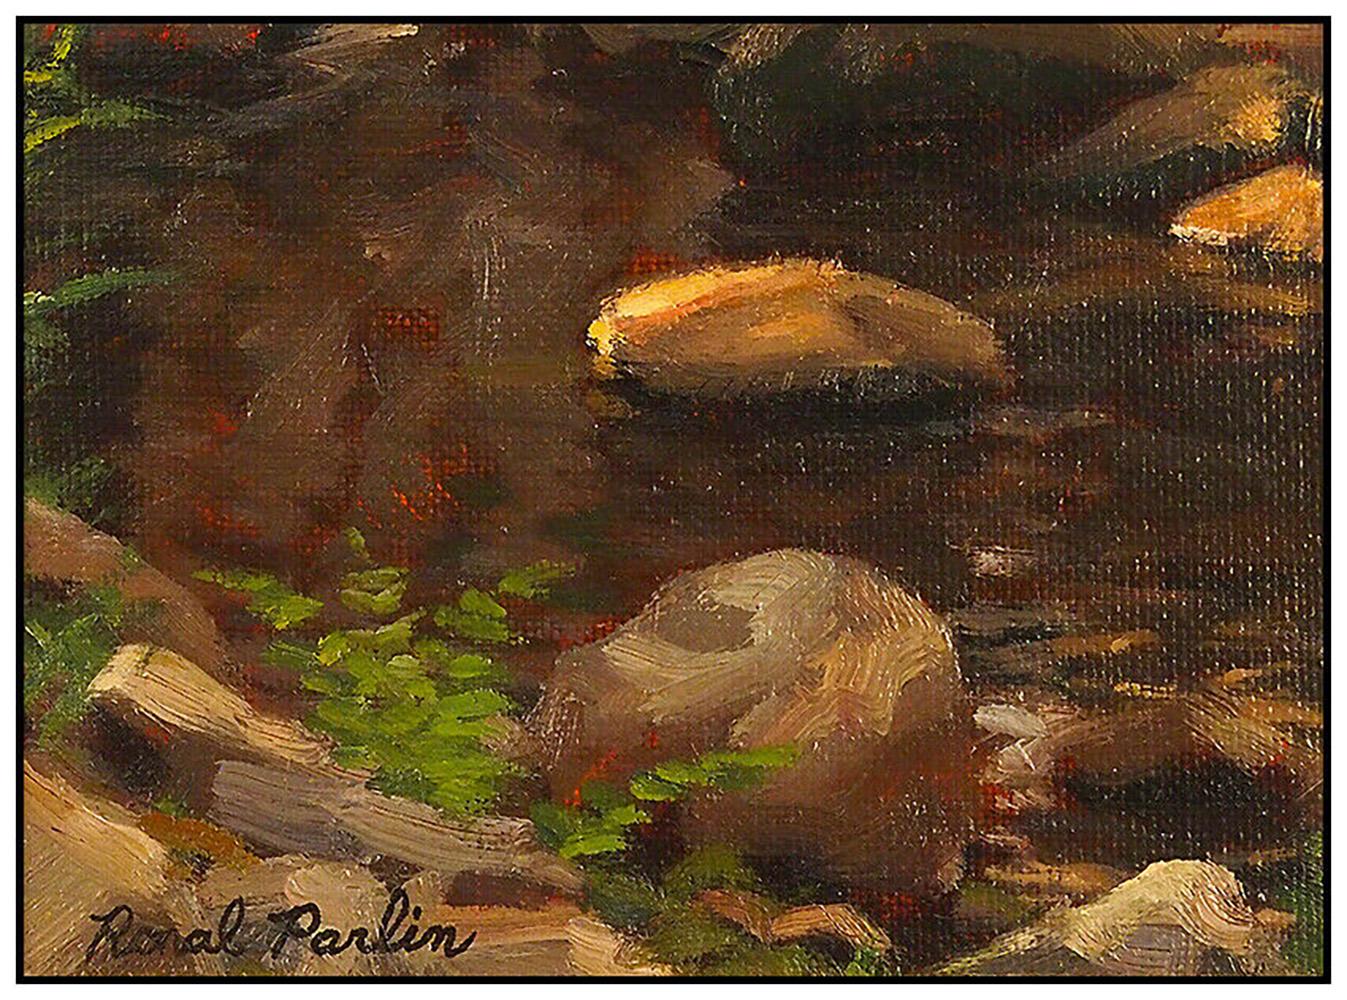 Ronal Parlin Authentic & Original Oil Painting on Board, Professionally Custom Framed and listed with the Submit Best Offer option

Accepting Offers Now: The item up for sale is a spectacular and bold Oil Painting on Board by Legendary